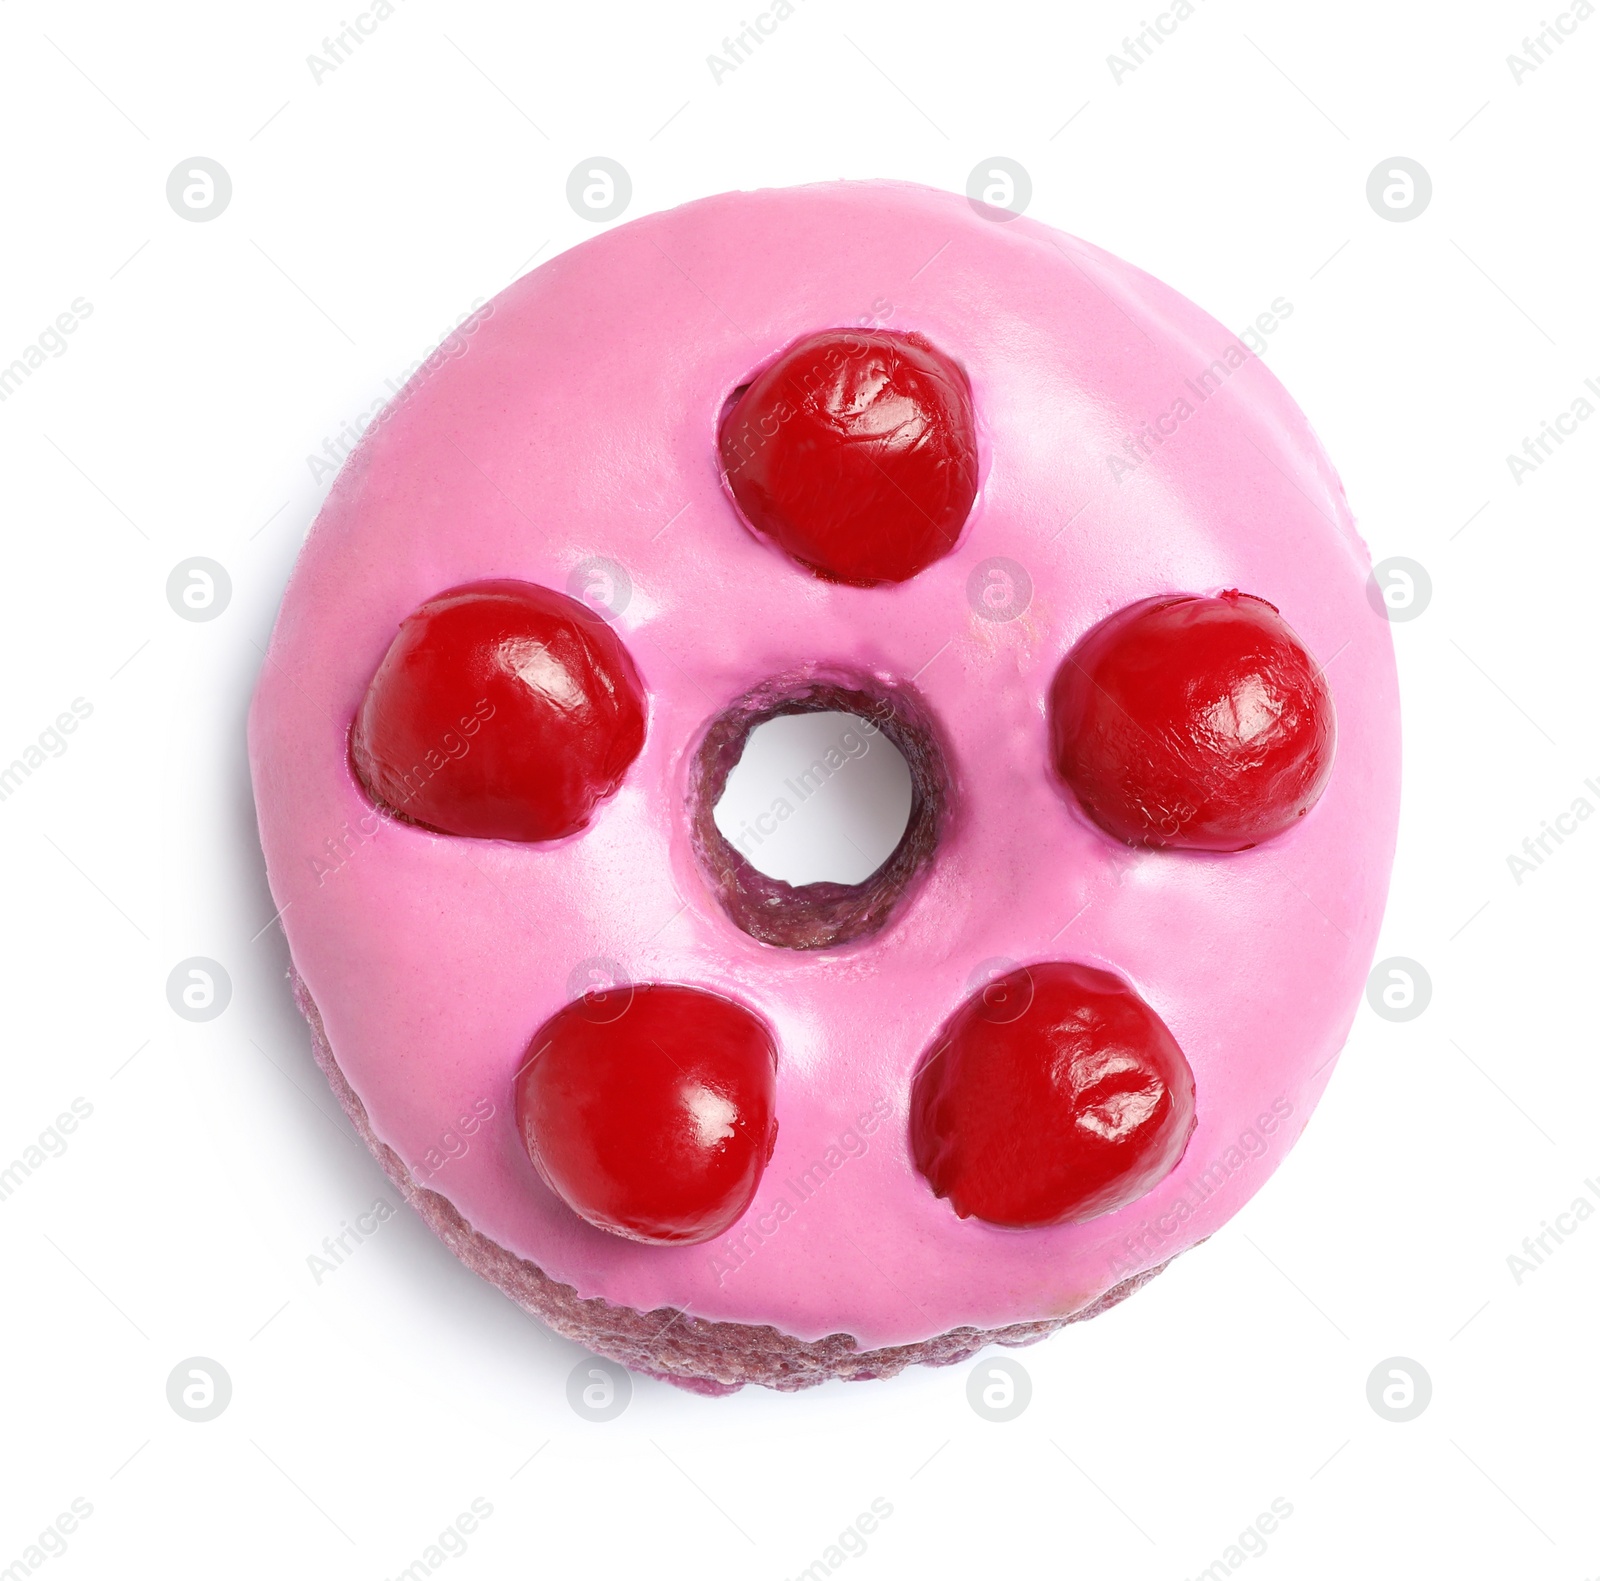 Photo of Sweet delicious glazed donut decorated with berries on white background, top view